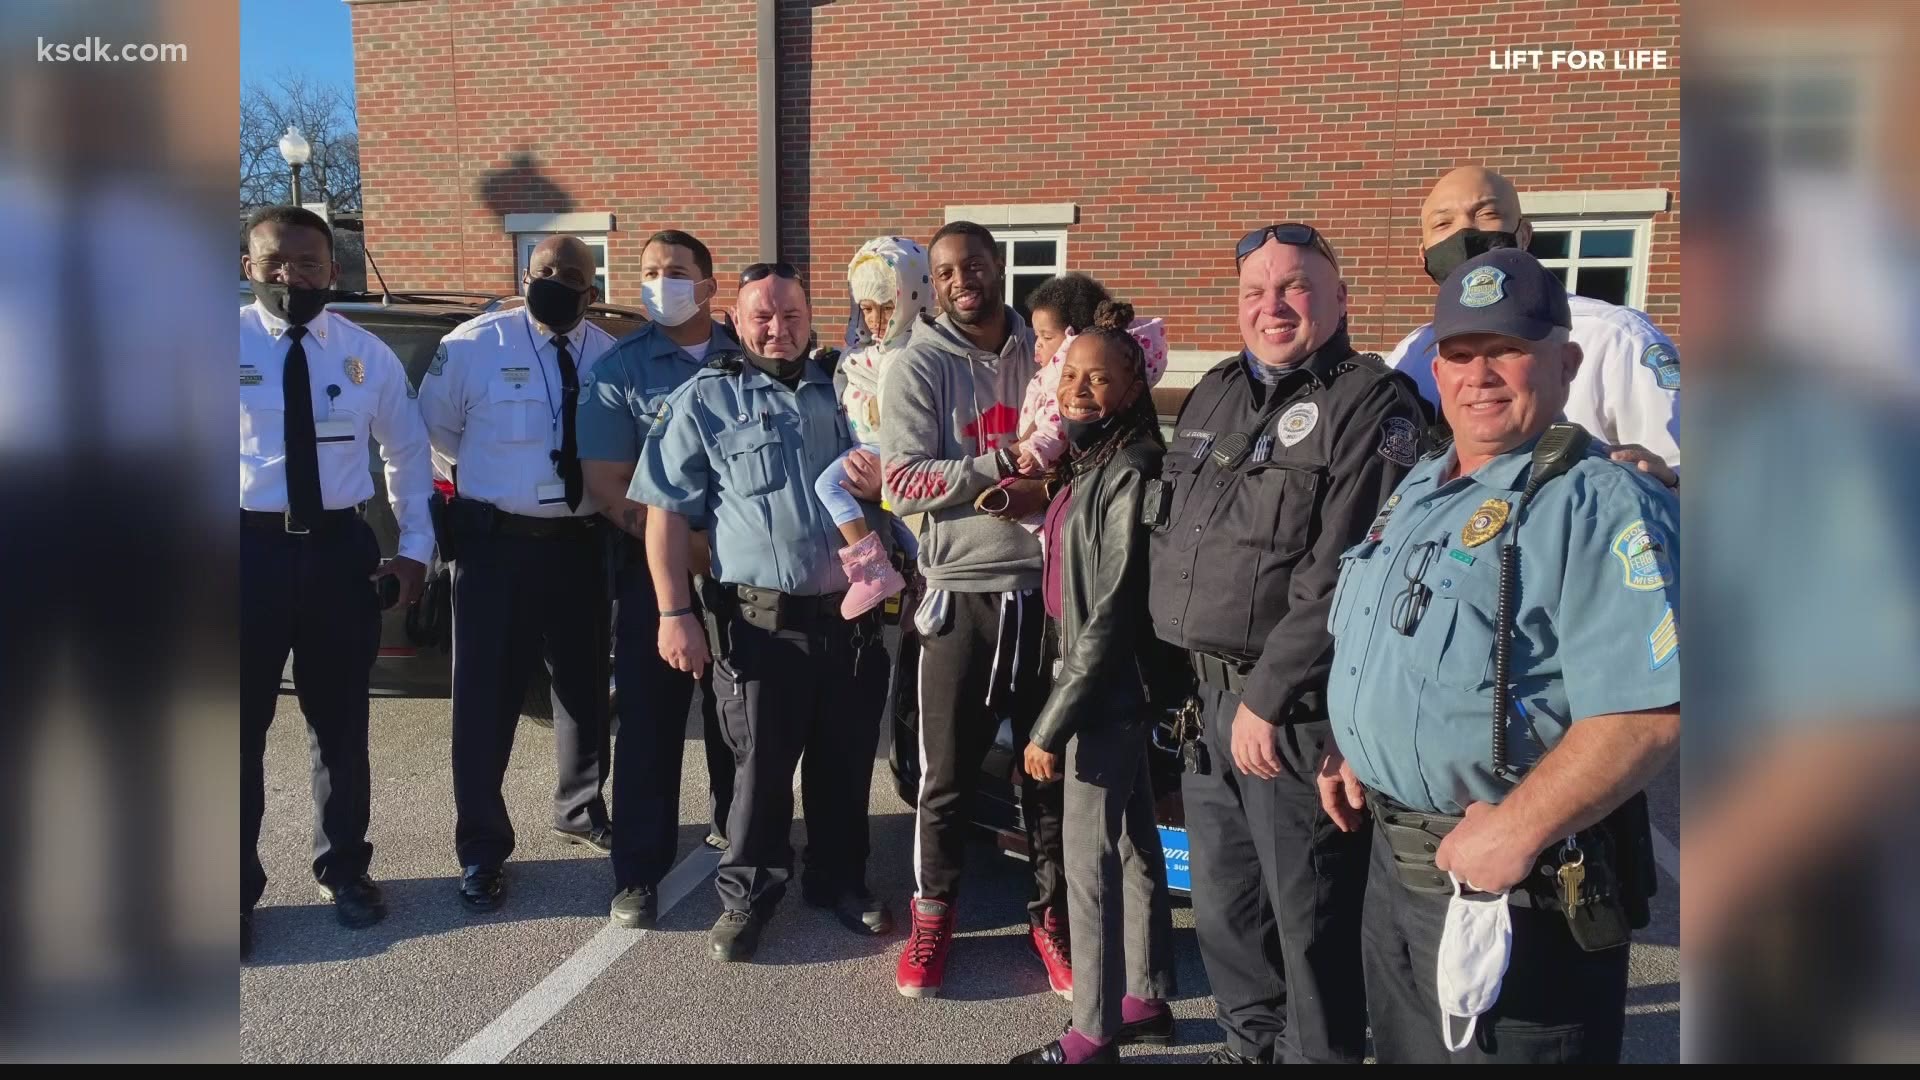 Officer Jamez Knighten was surprised with a car and a community hero award during a recent moment commemorating the anniversary of his heroic act